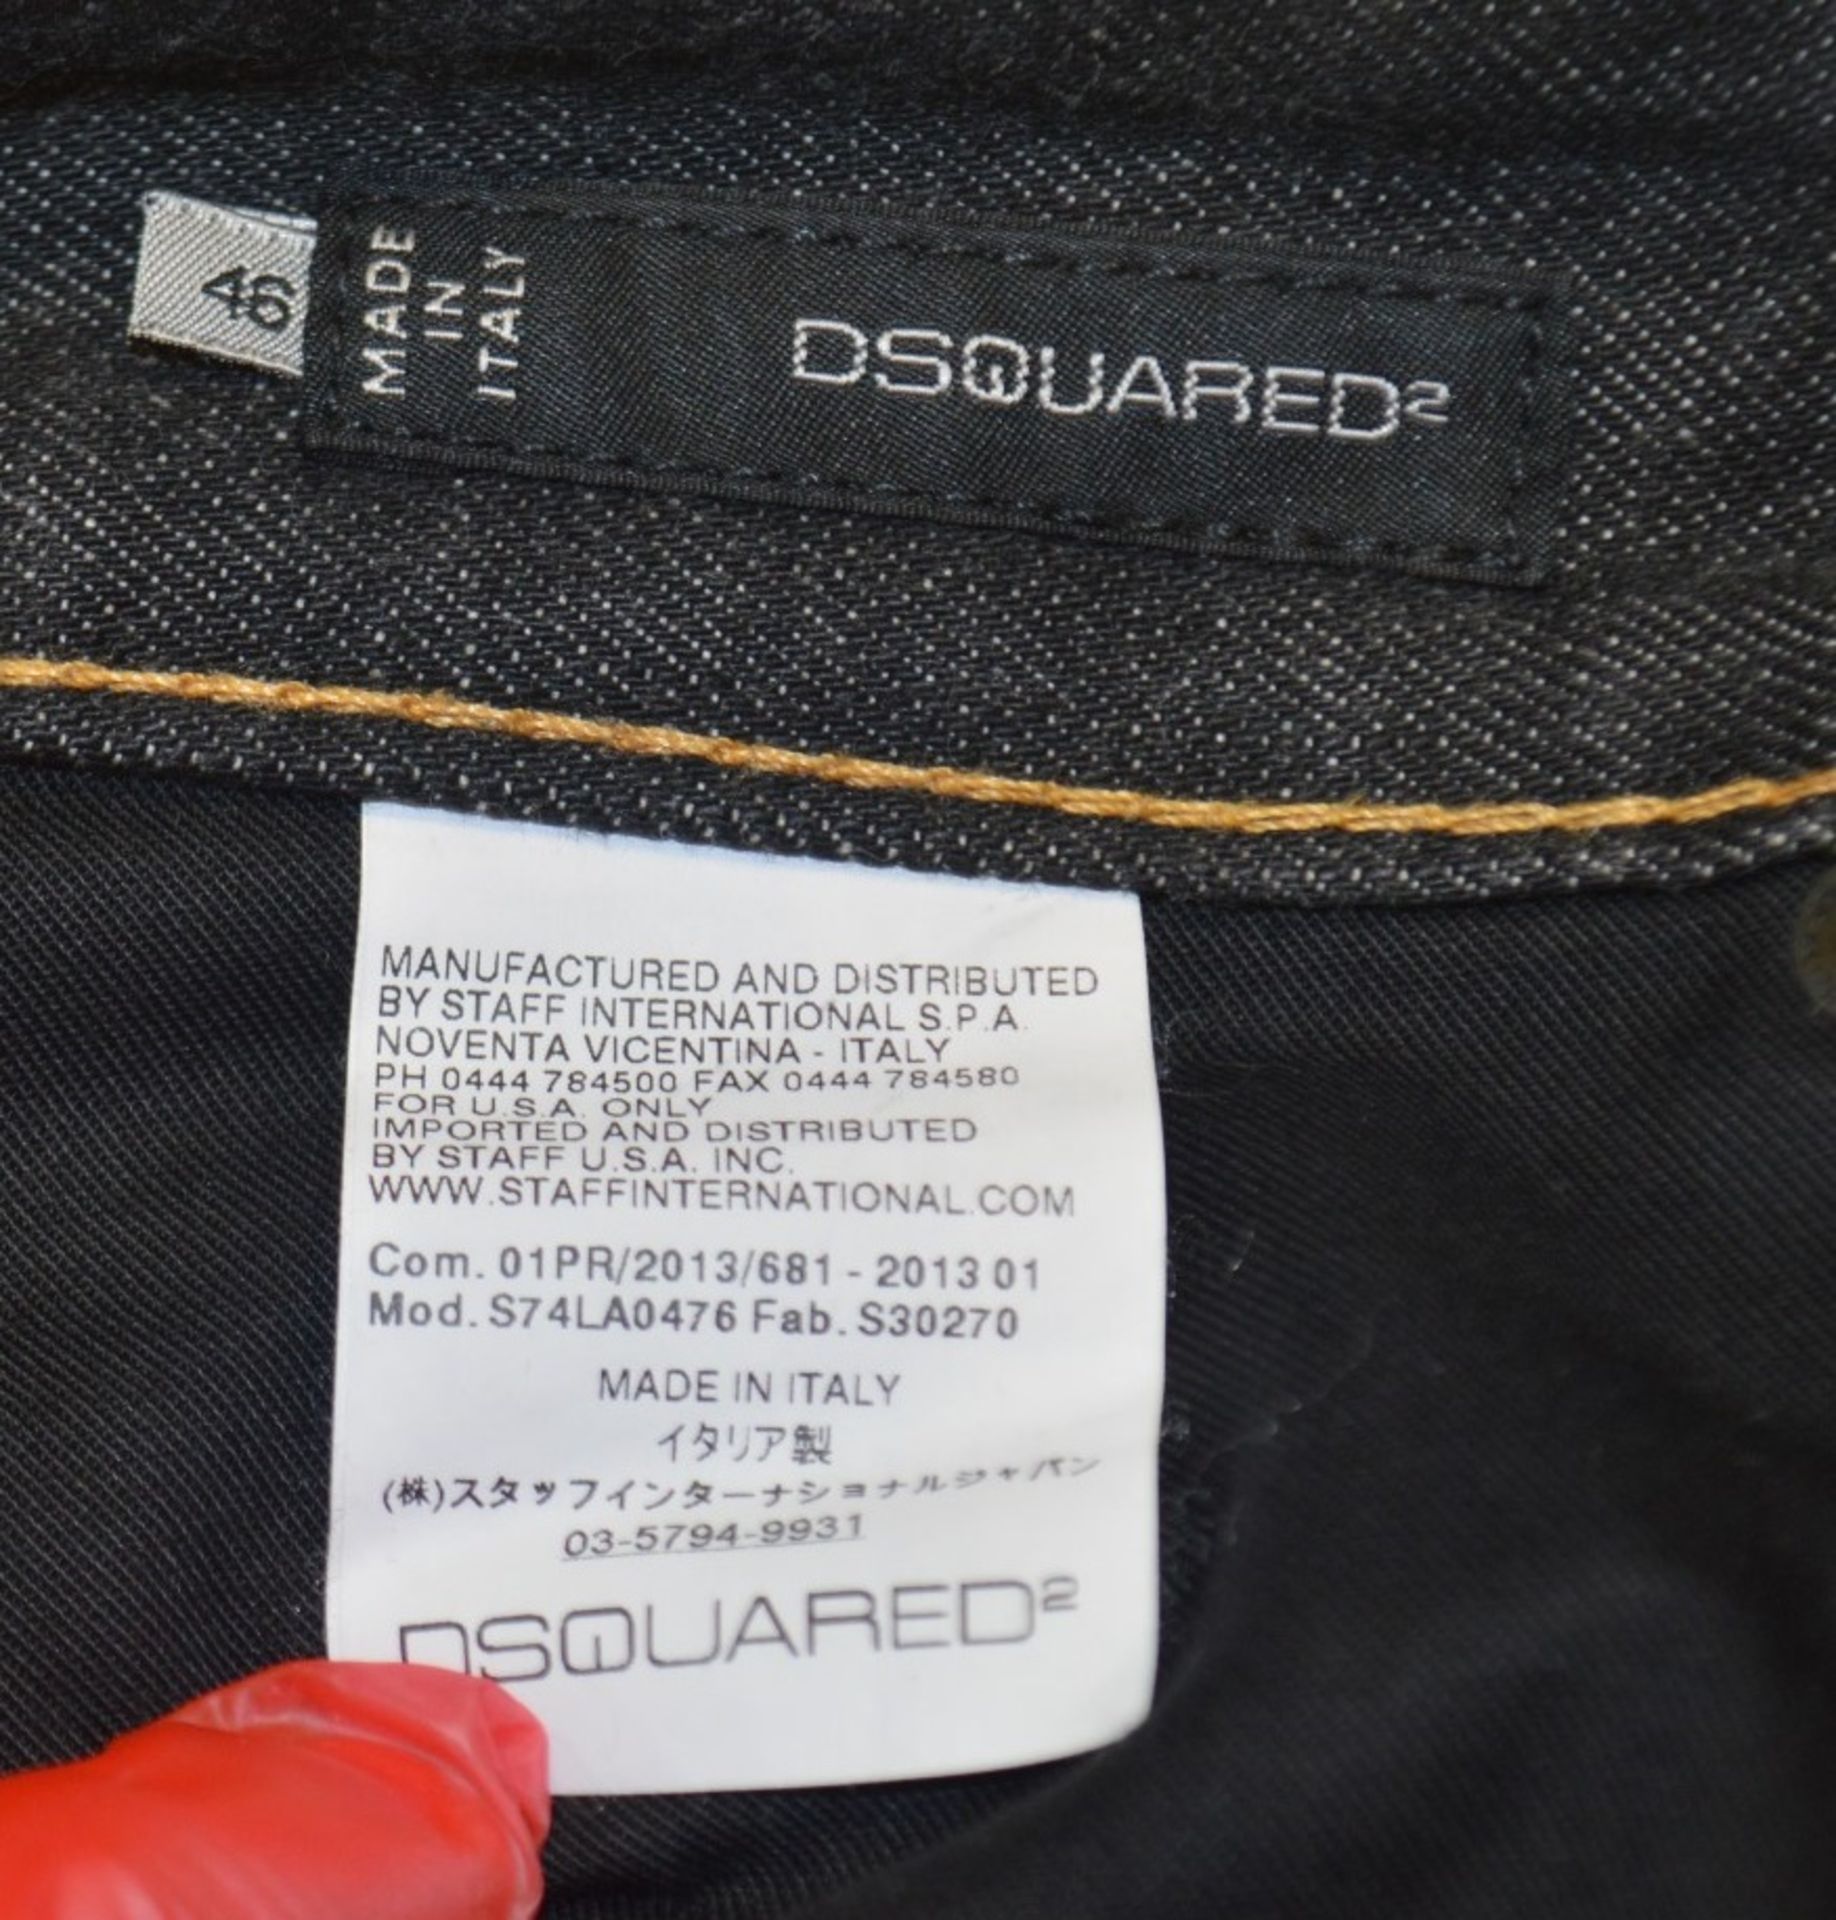 1 x Pair Of Men's Genuine Dsquared2 Distressed-style Designer Jeans In Black - Size: UK 30 - Image 5 of 7